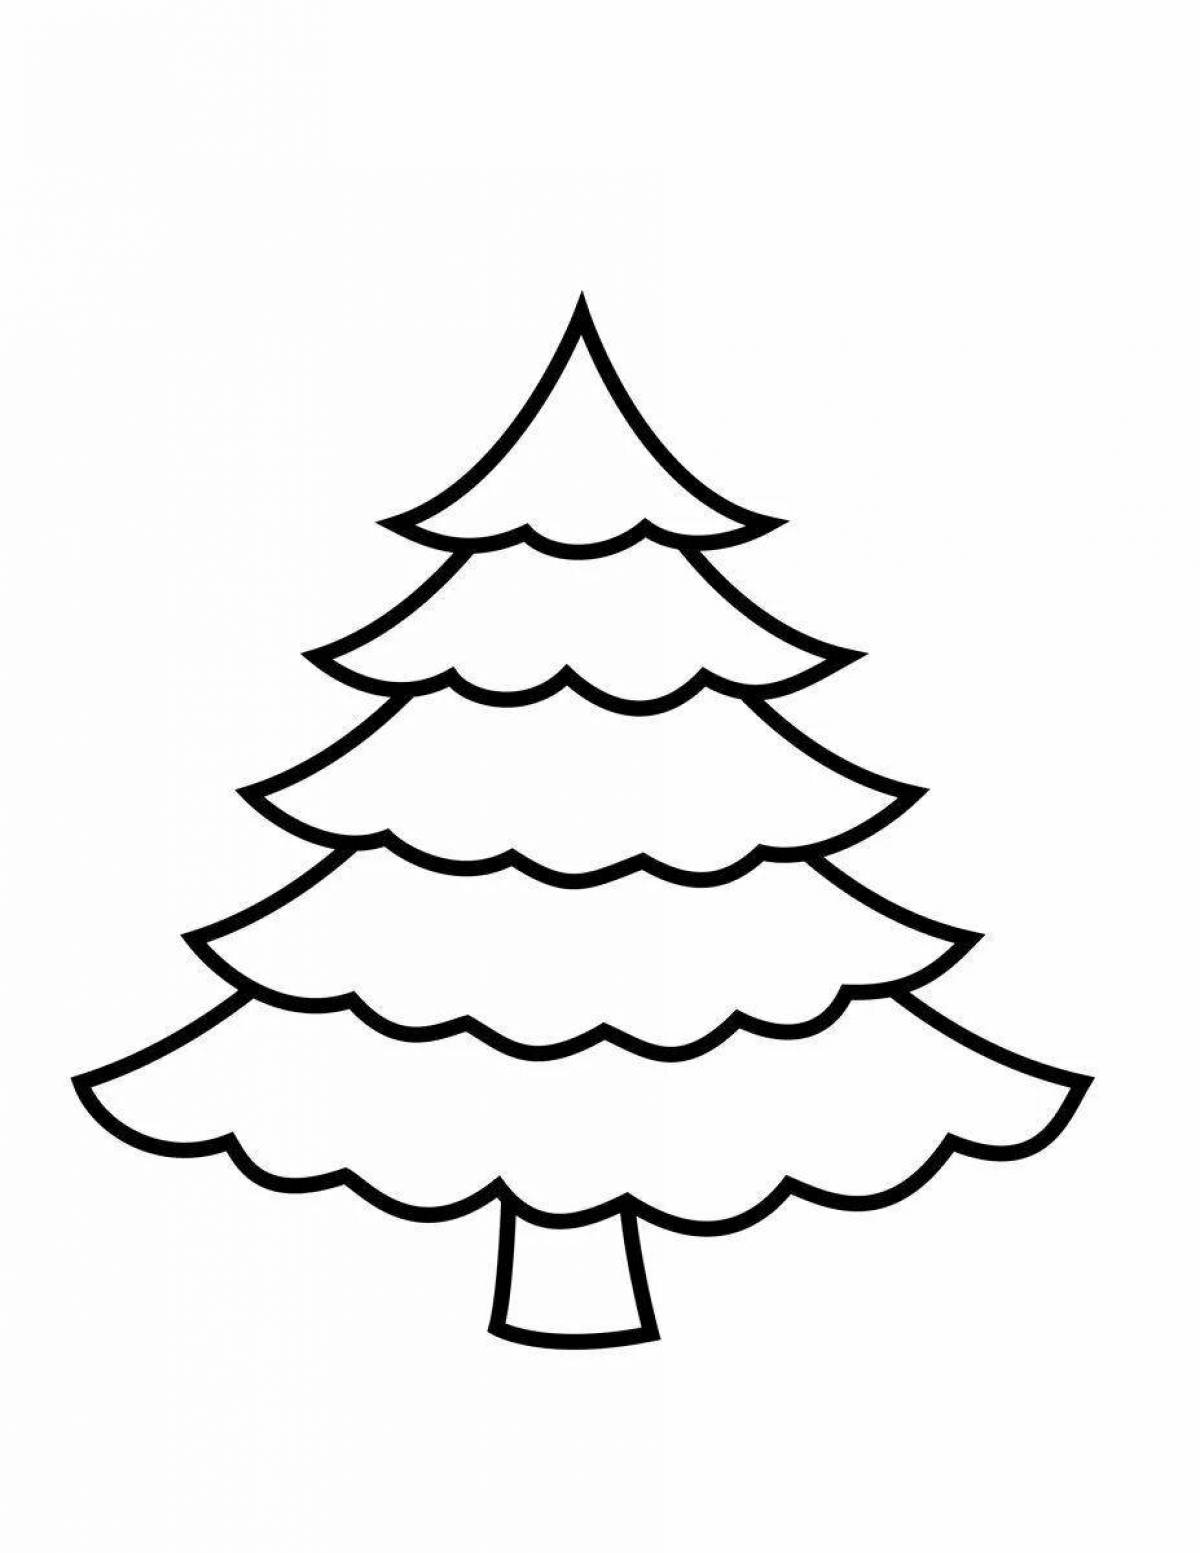 Exquisite Christmas tree coloring book for kids